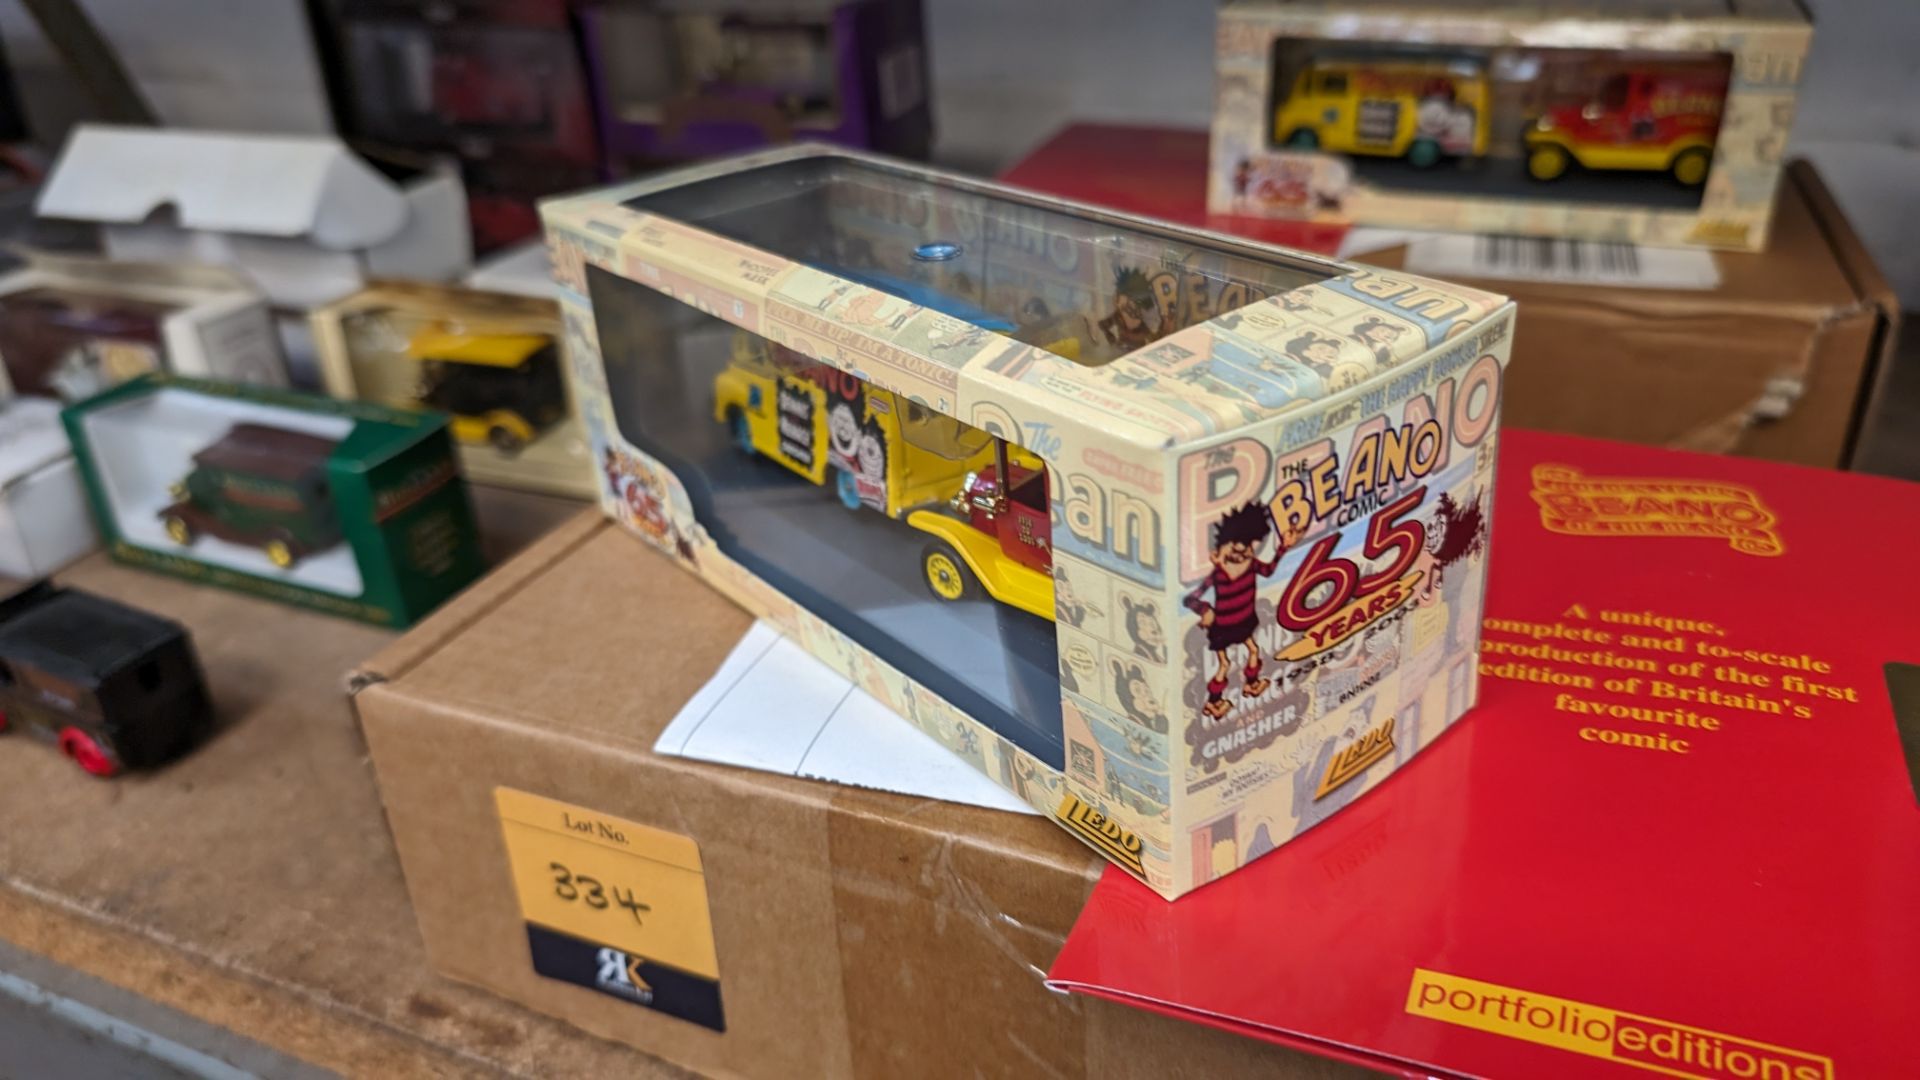 Beano 65th anniversary gift set including reproduction of the first edition of the comic plus 2 mode - Image 9 of 9